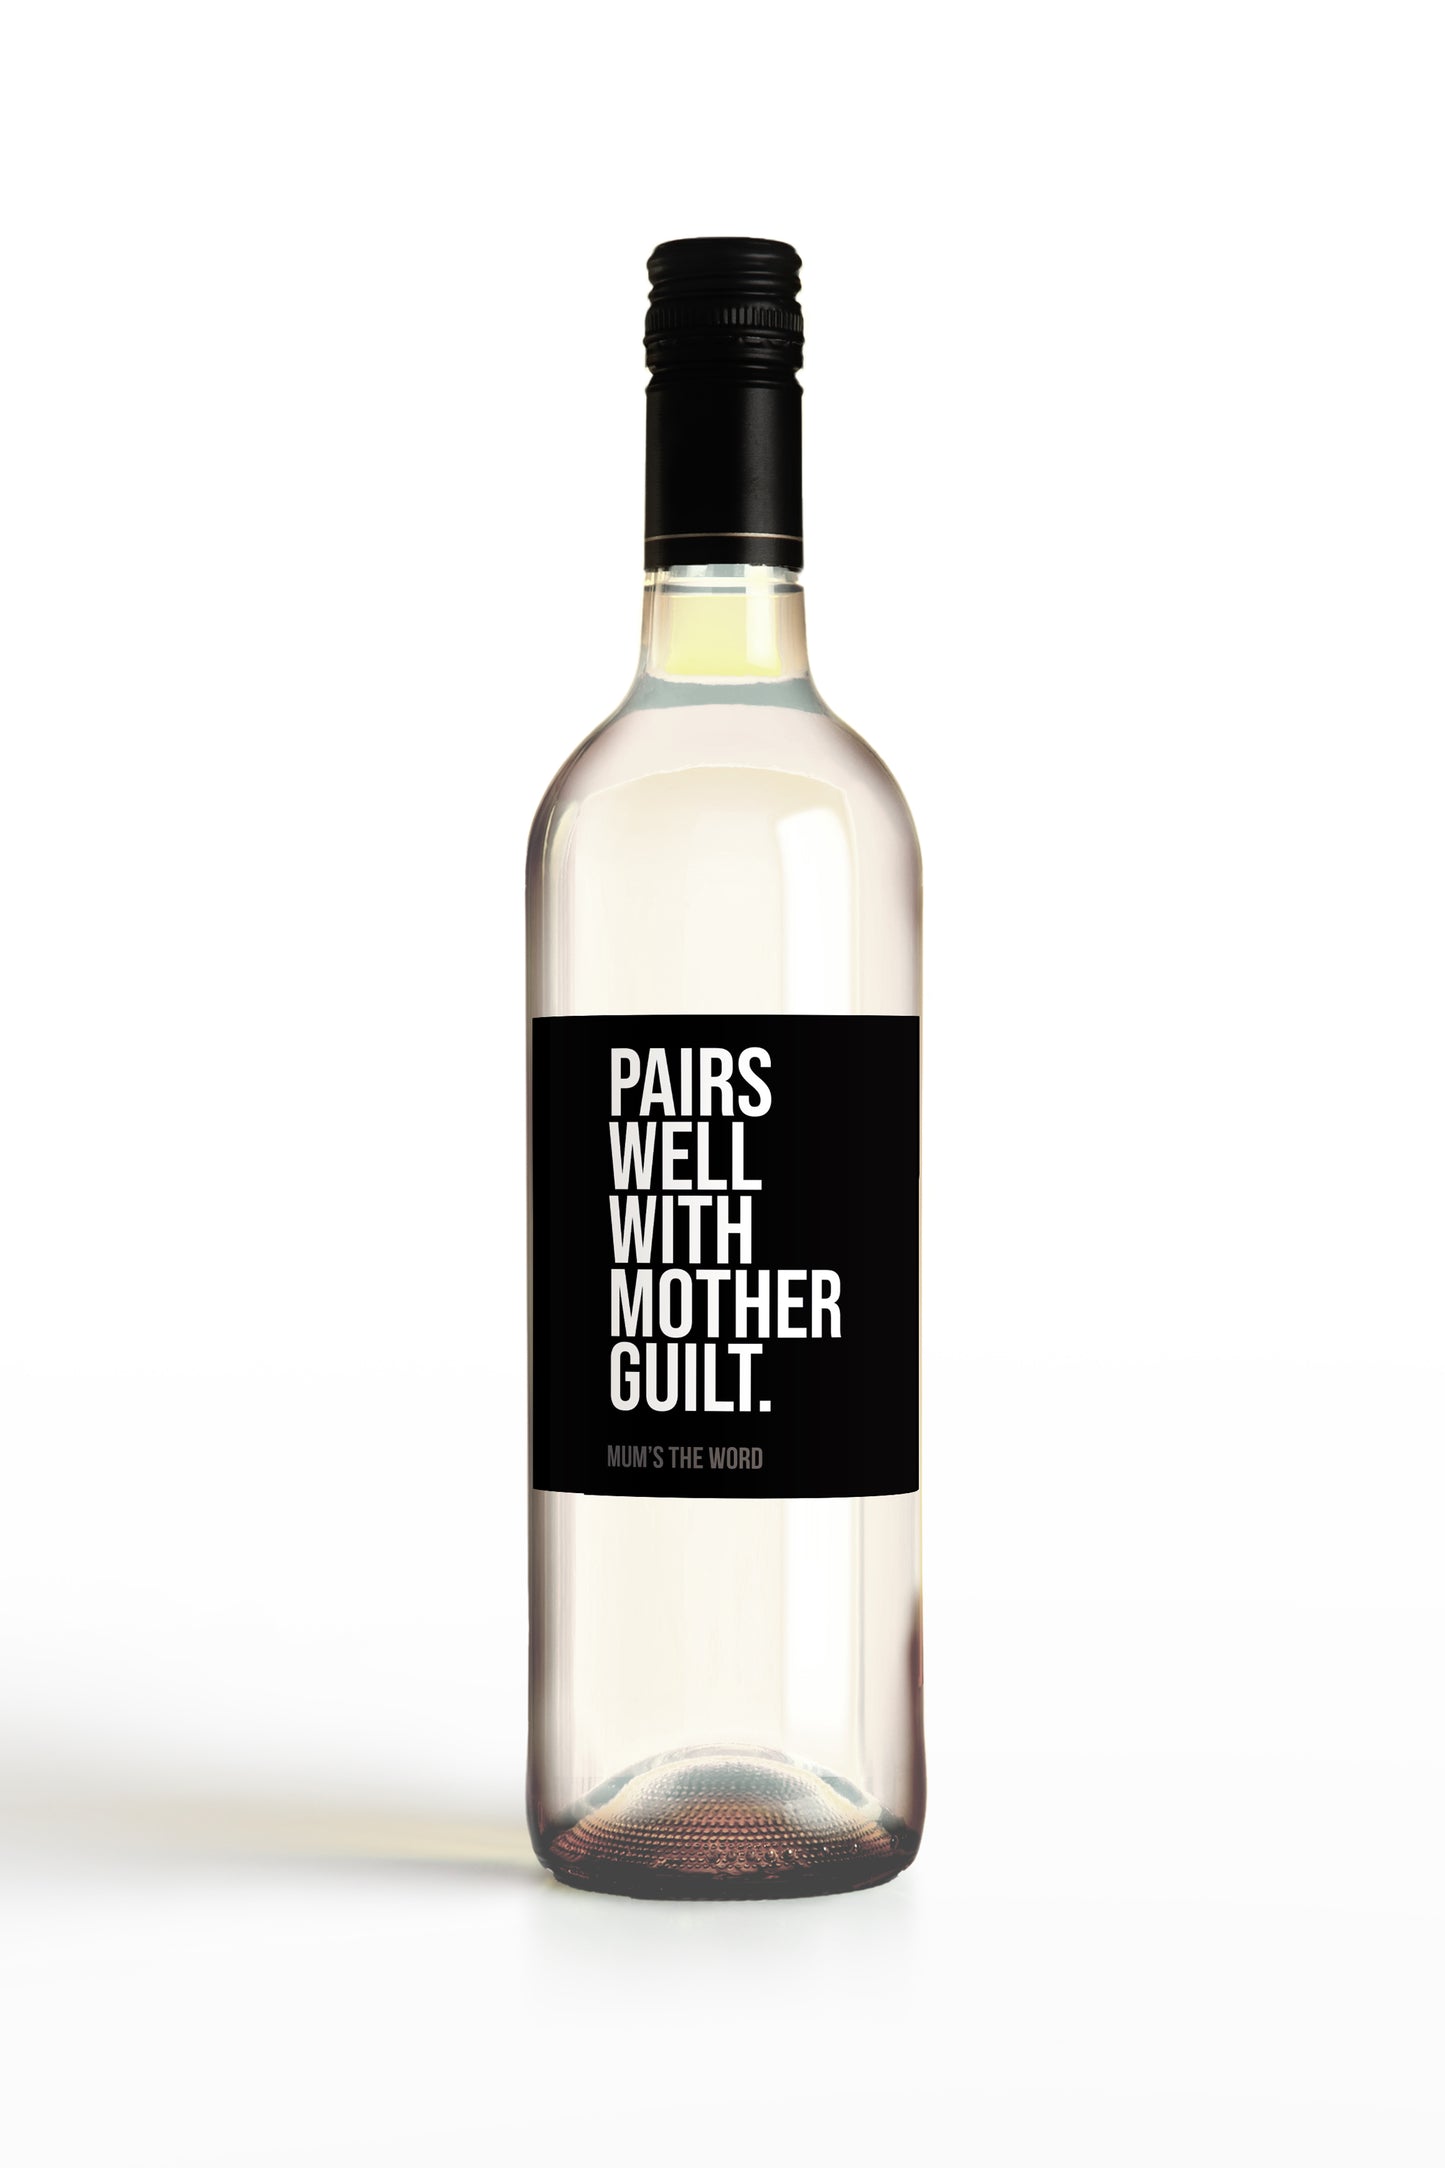 Pairs Well With Mother Guilt.